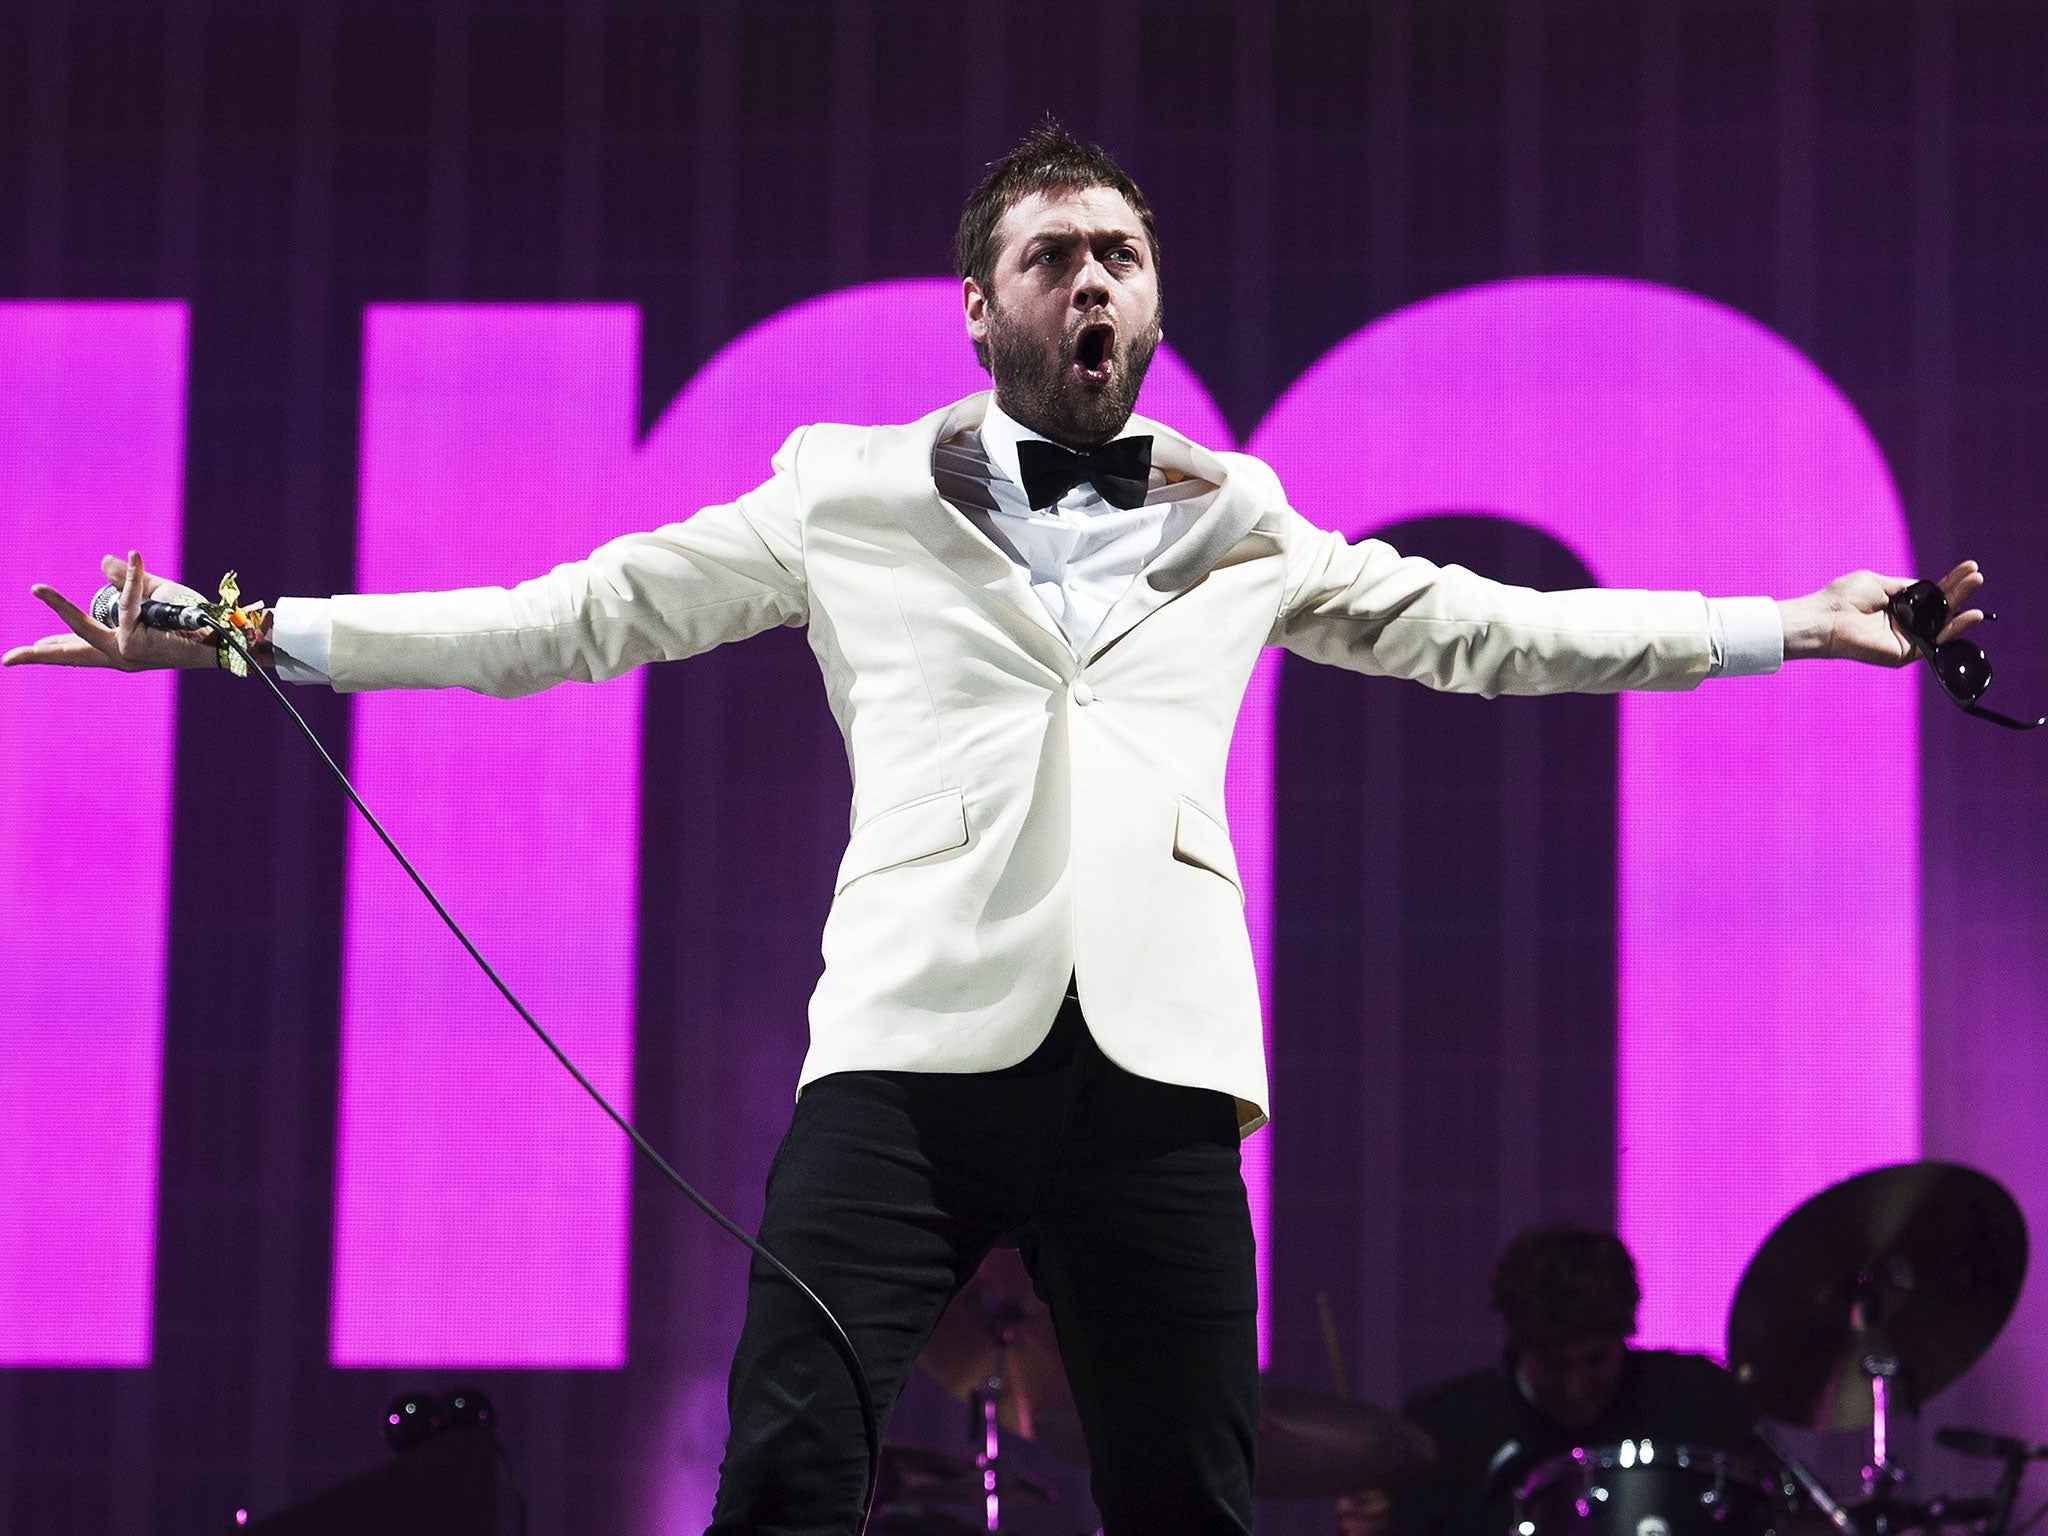 Lead singer Tom Meighan of British band Kasabian performs at the Pyramid Stage of the Glastonbury Festival of Contemporary Performing Arts 2014, held at Worthy Farm, near Pilton, Somerset